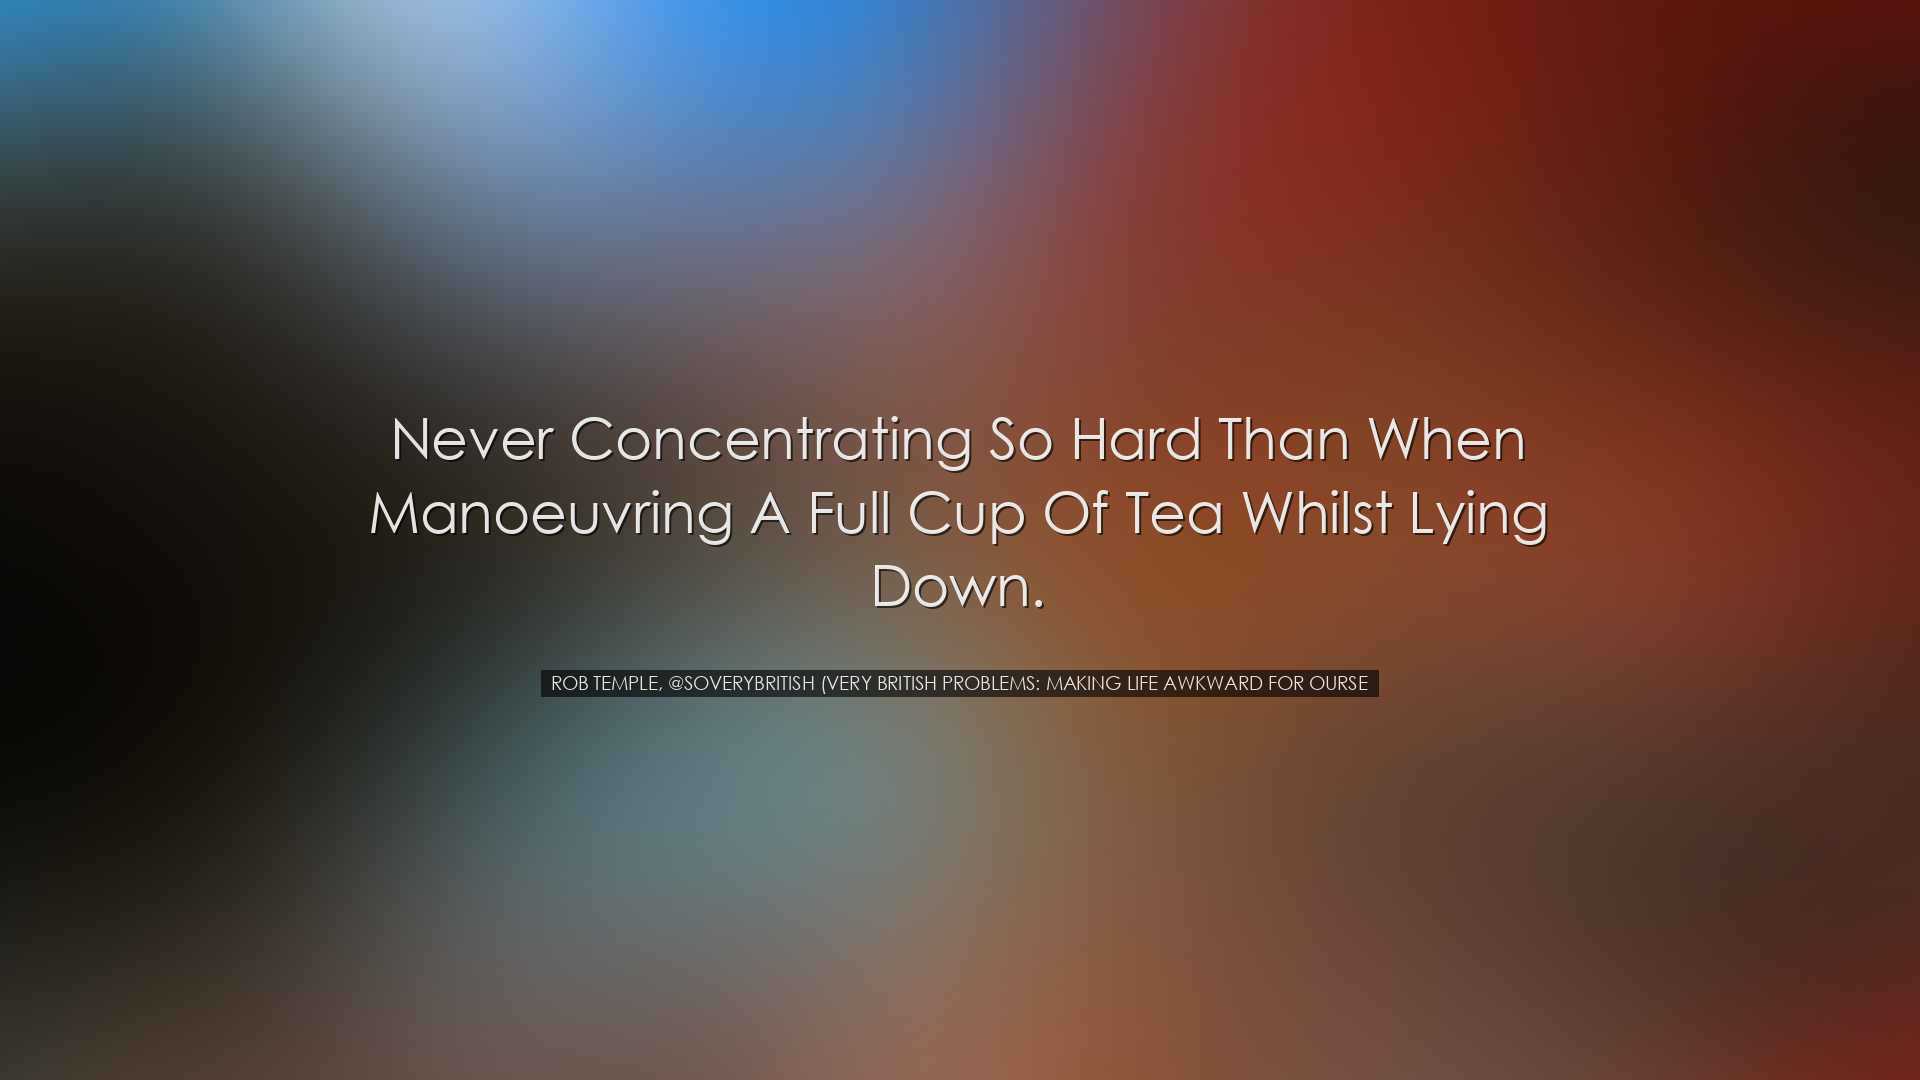 Never concentrating so hard than when manoeuvring a full cup of te